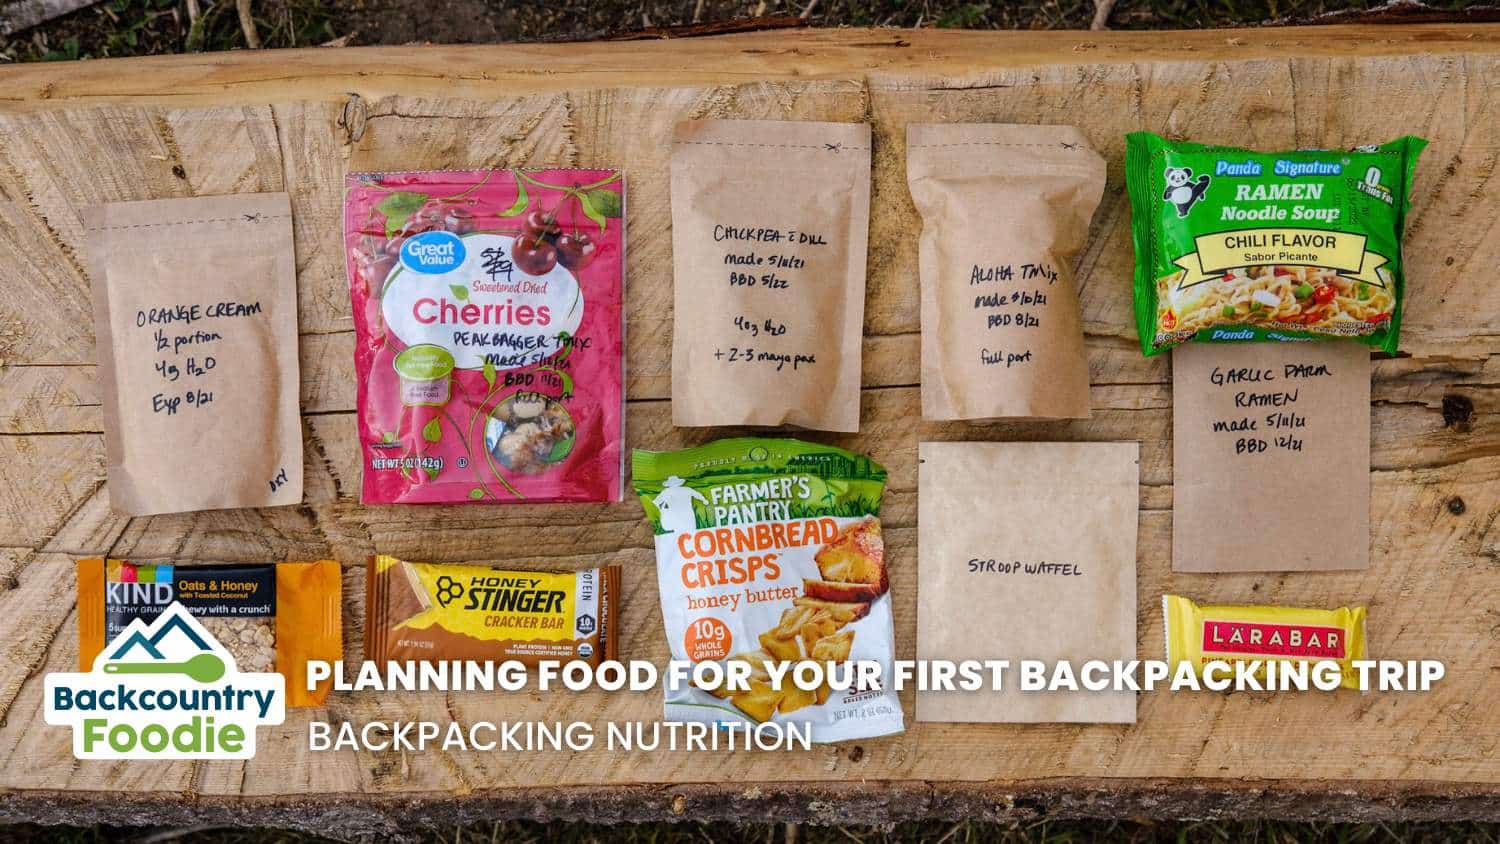 Backcountry Foodie Blog How to Plan Food for First Backpacking Trip thumbnail title image